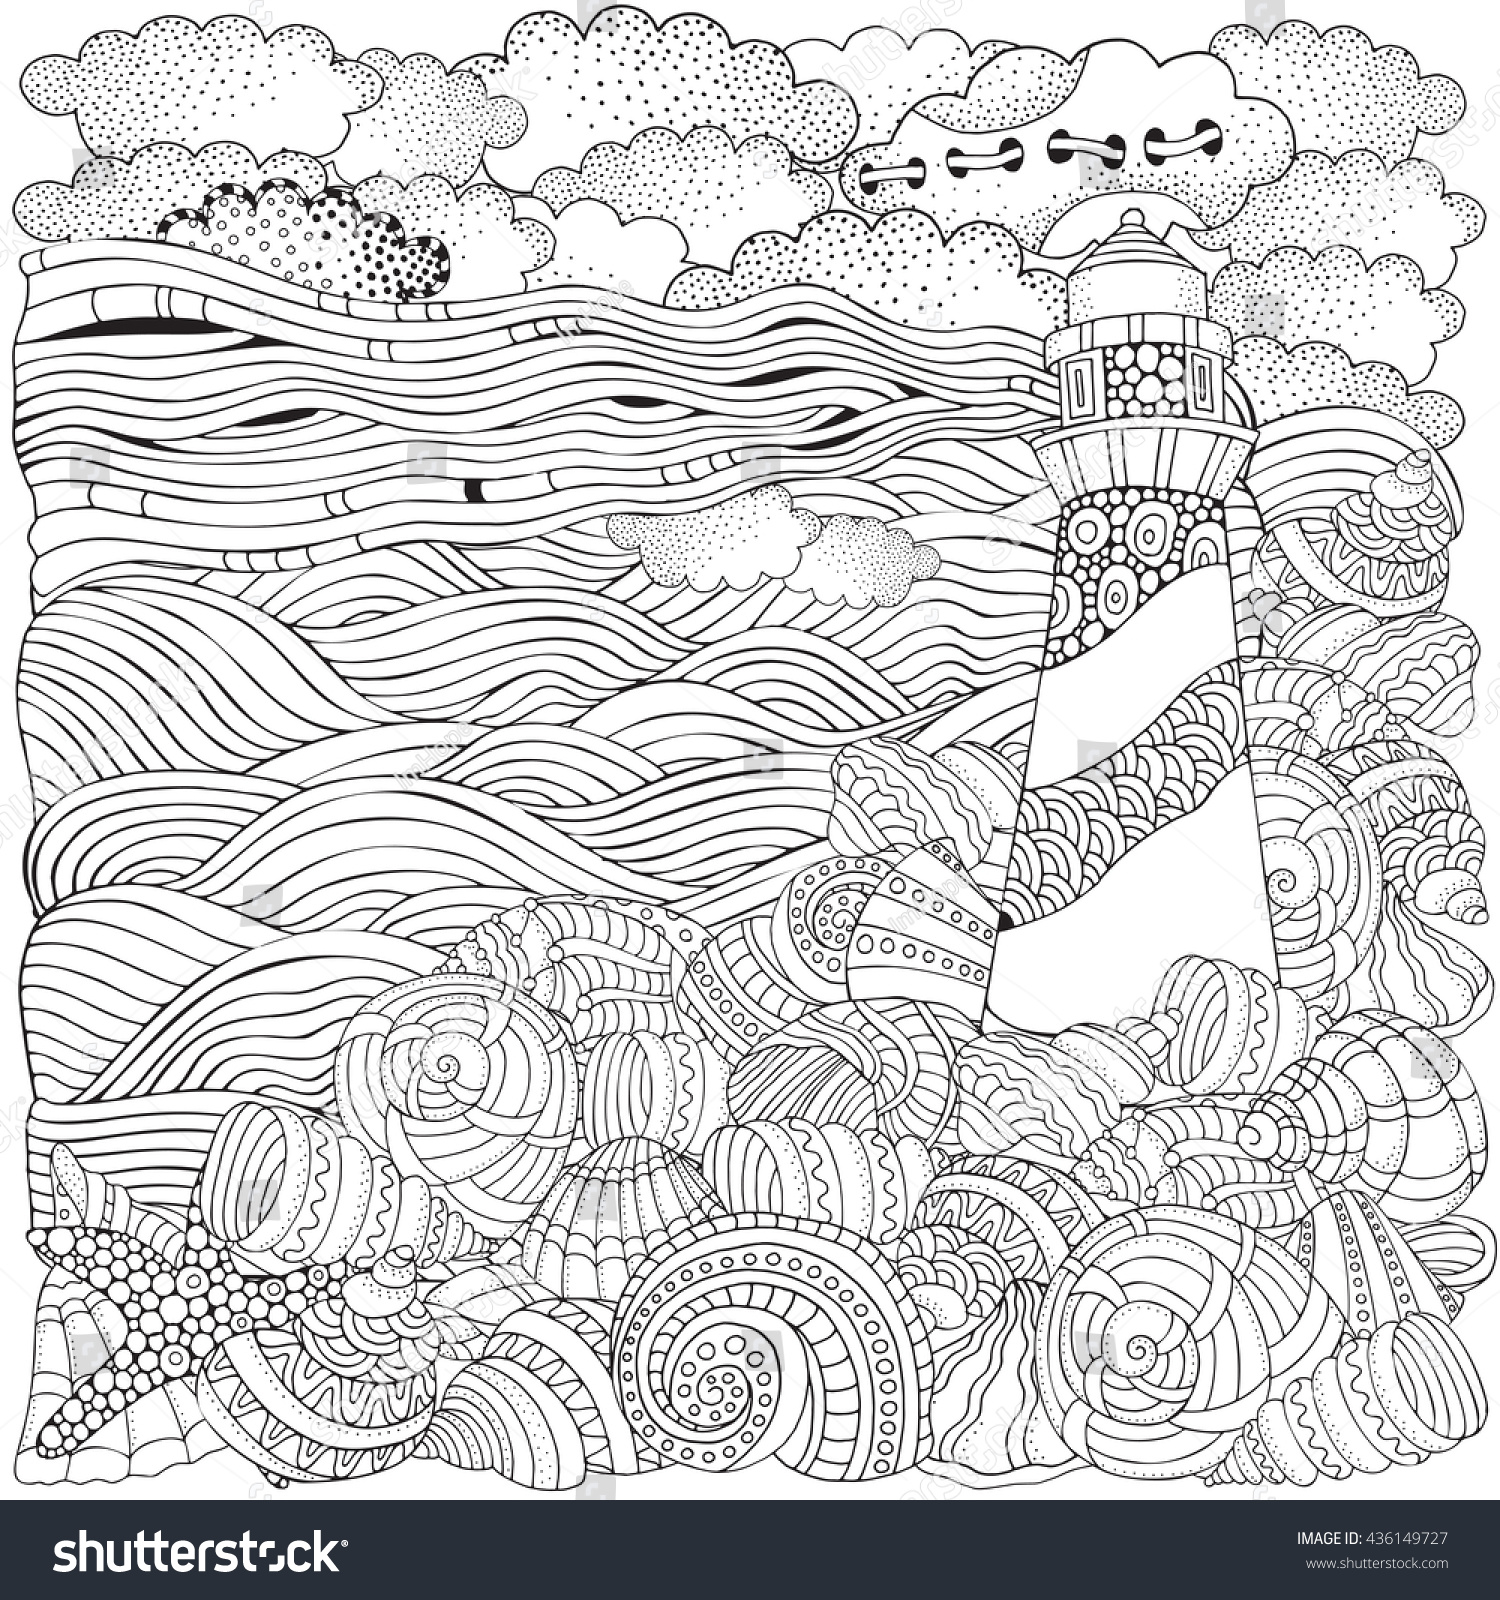 Lighthouse And Shells, Seascape. Coloring Book Page For Adult. Waves ...